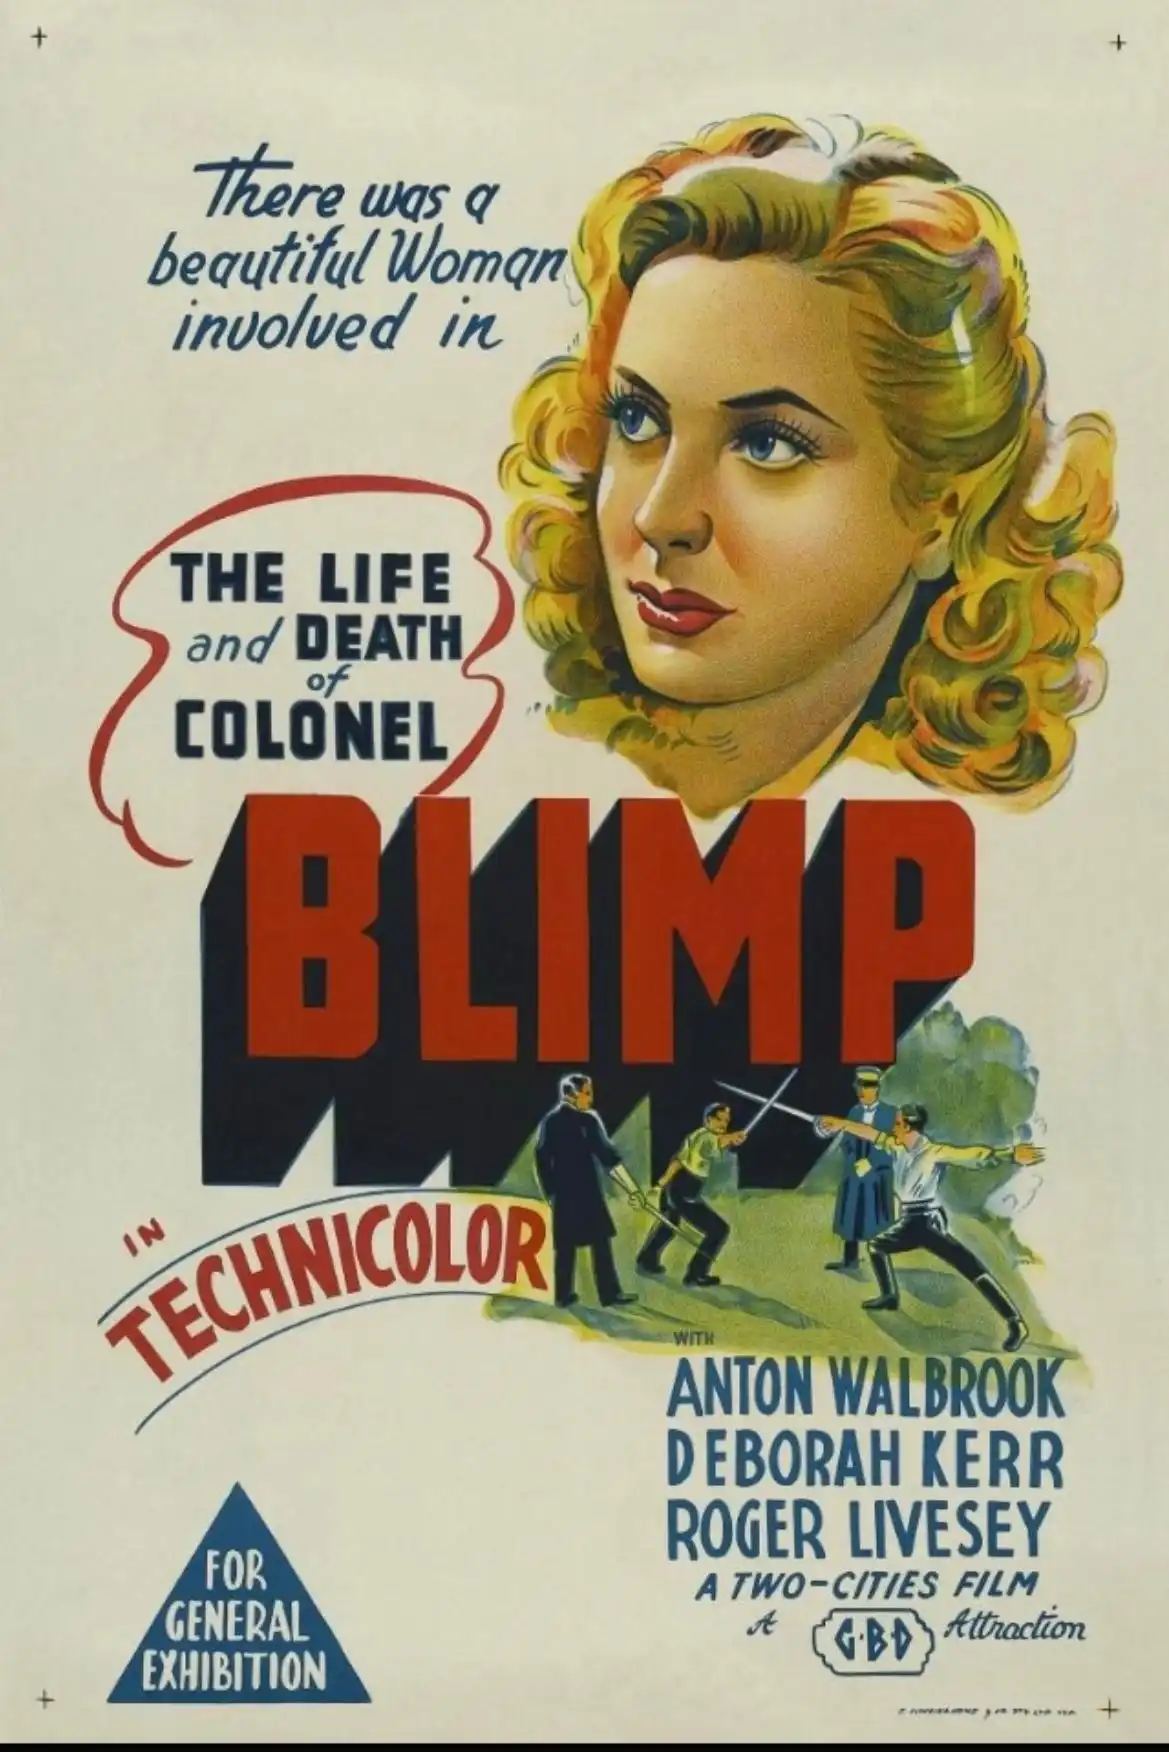 Watch and Download A Profile of 'The Life and Death of Colonel Blimp' 1